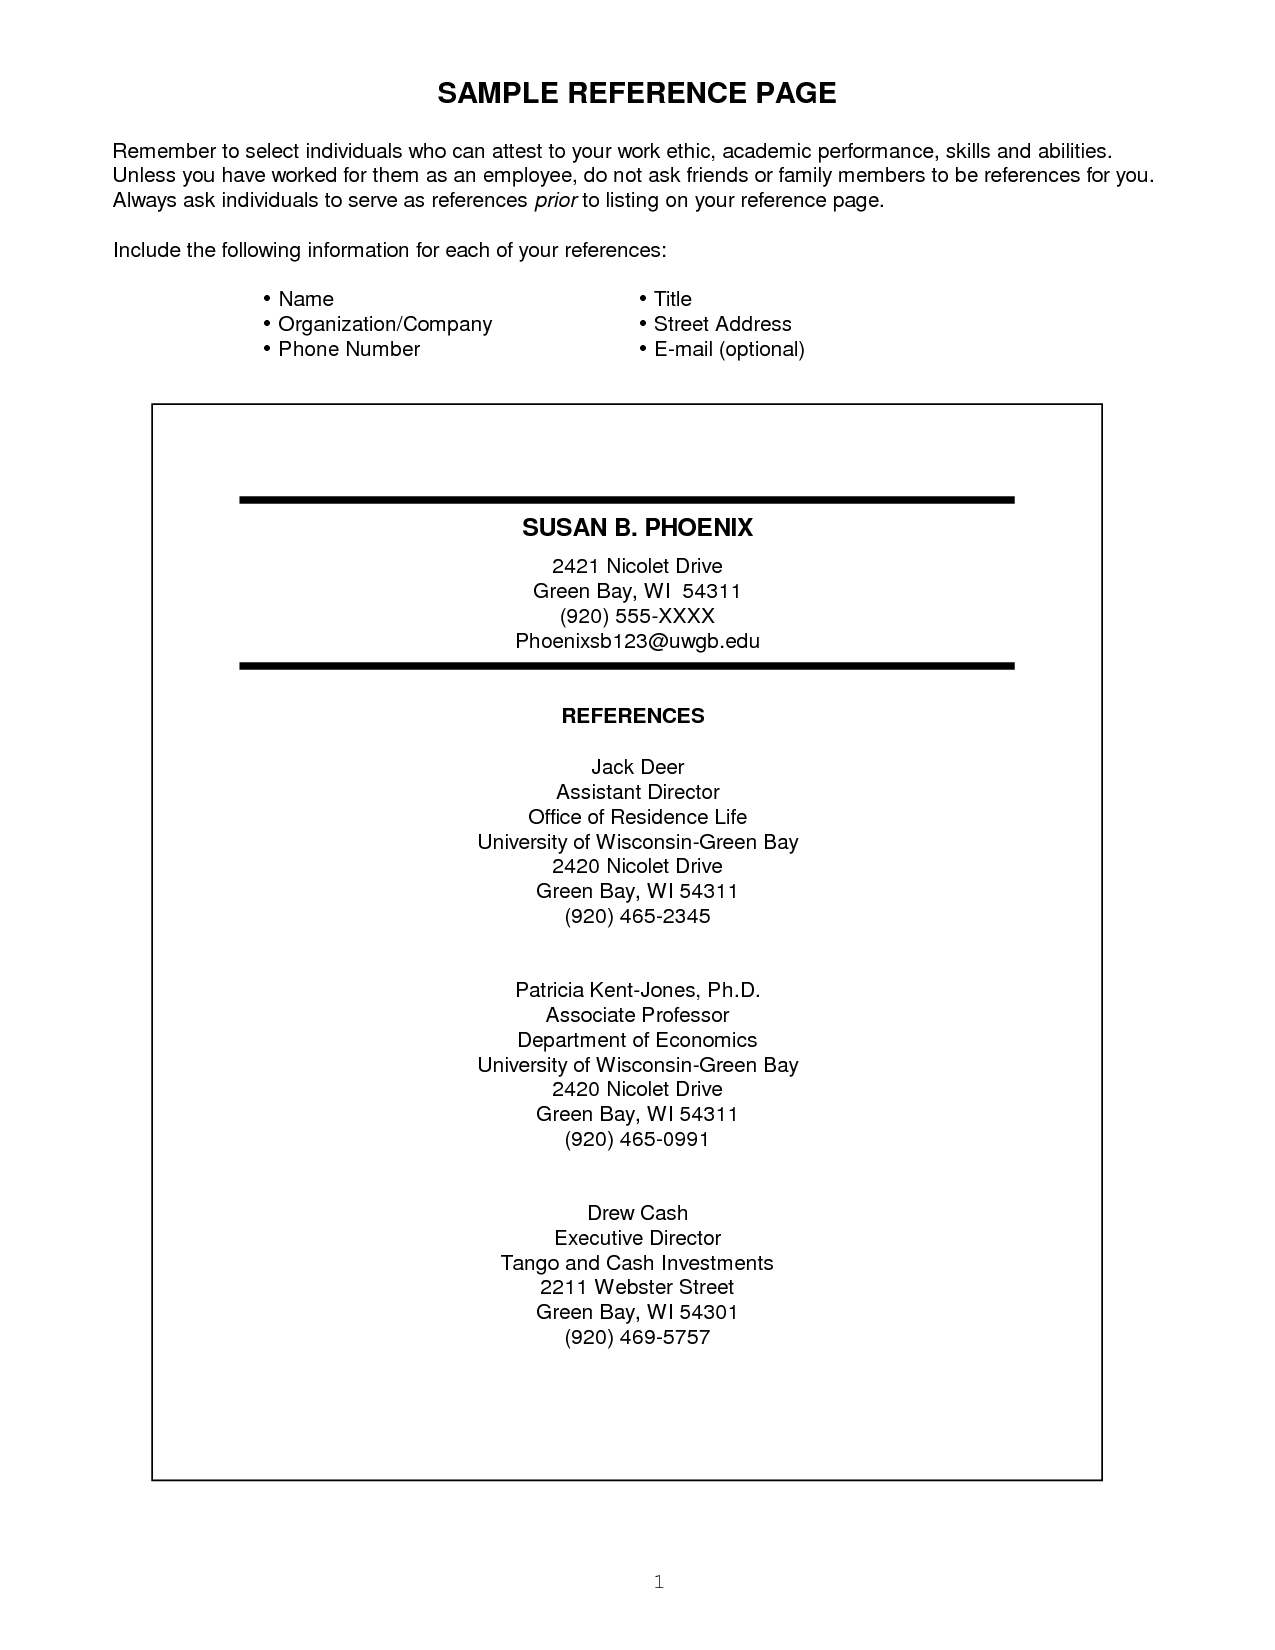 Reference Request Letter Template - Reference Sample for Resume Resume Reference Page